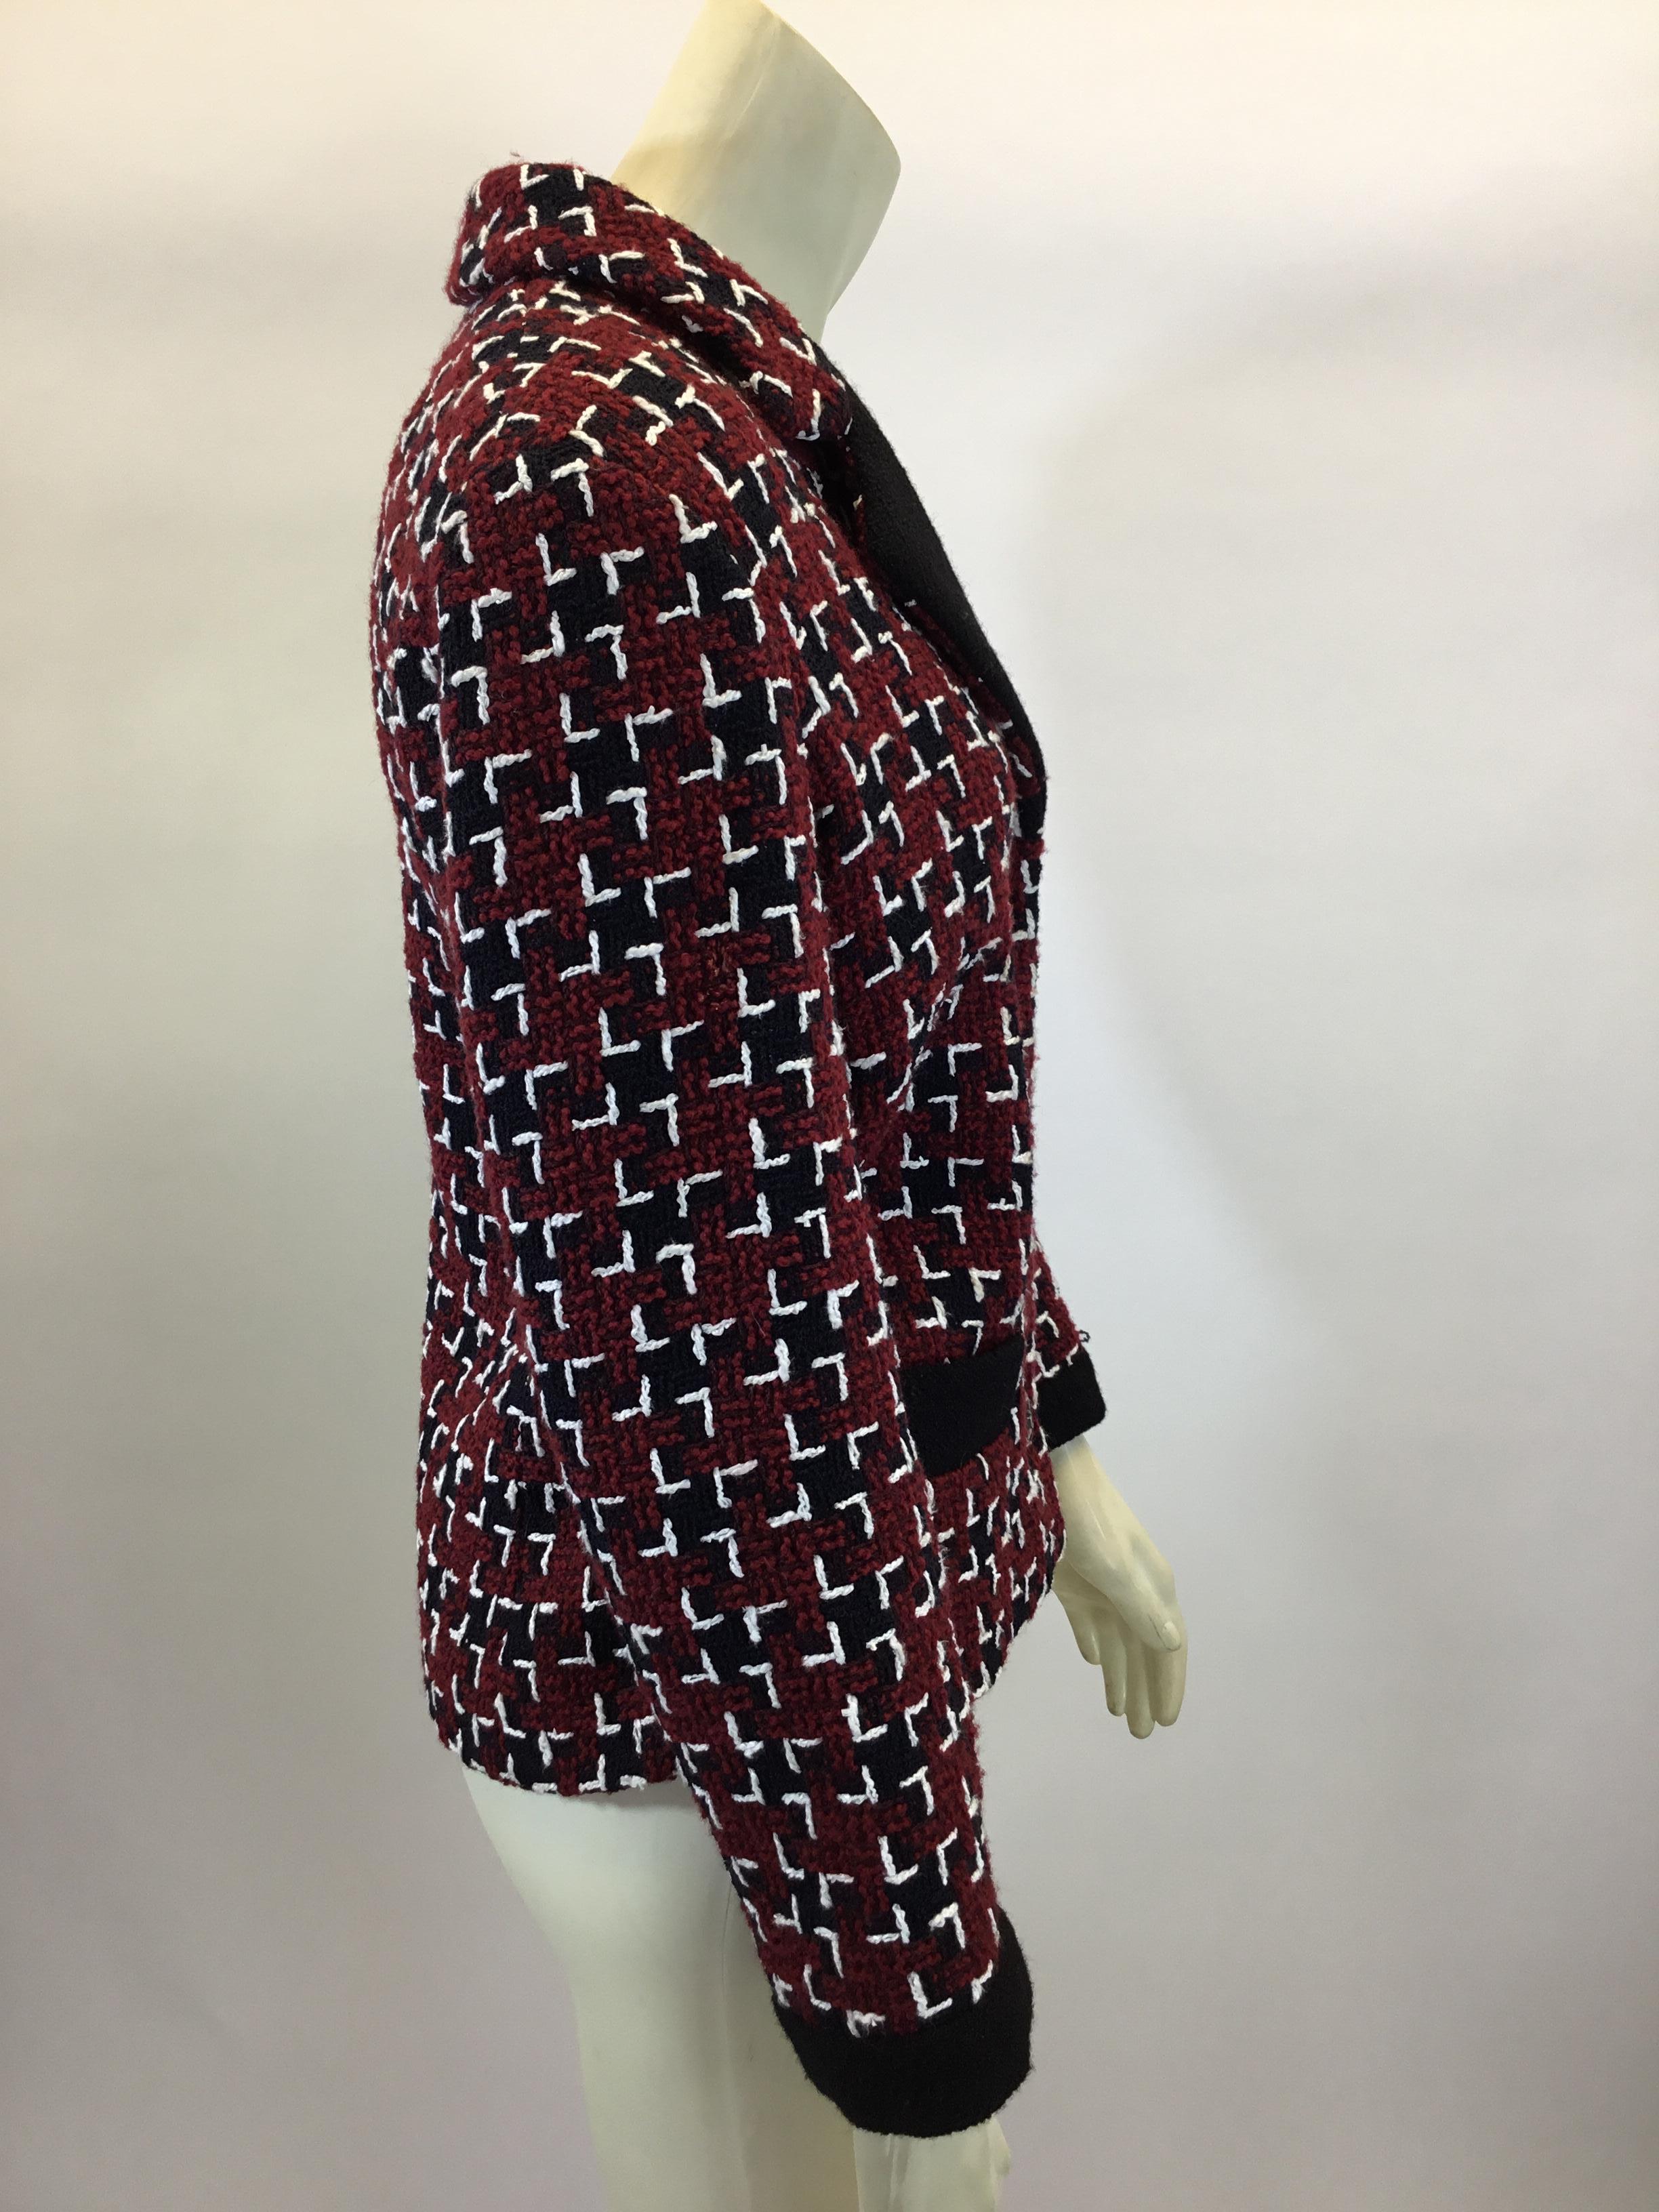 Chanel Burgundy and Black Tweed Jacket In Good Condition For Sale In Narberth, PA